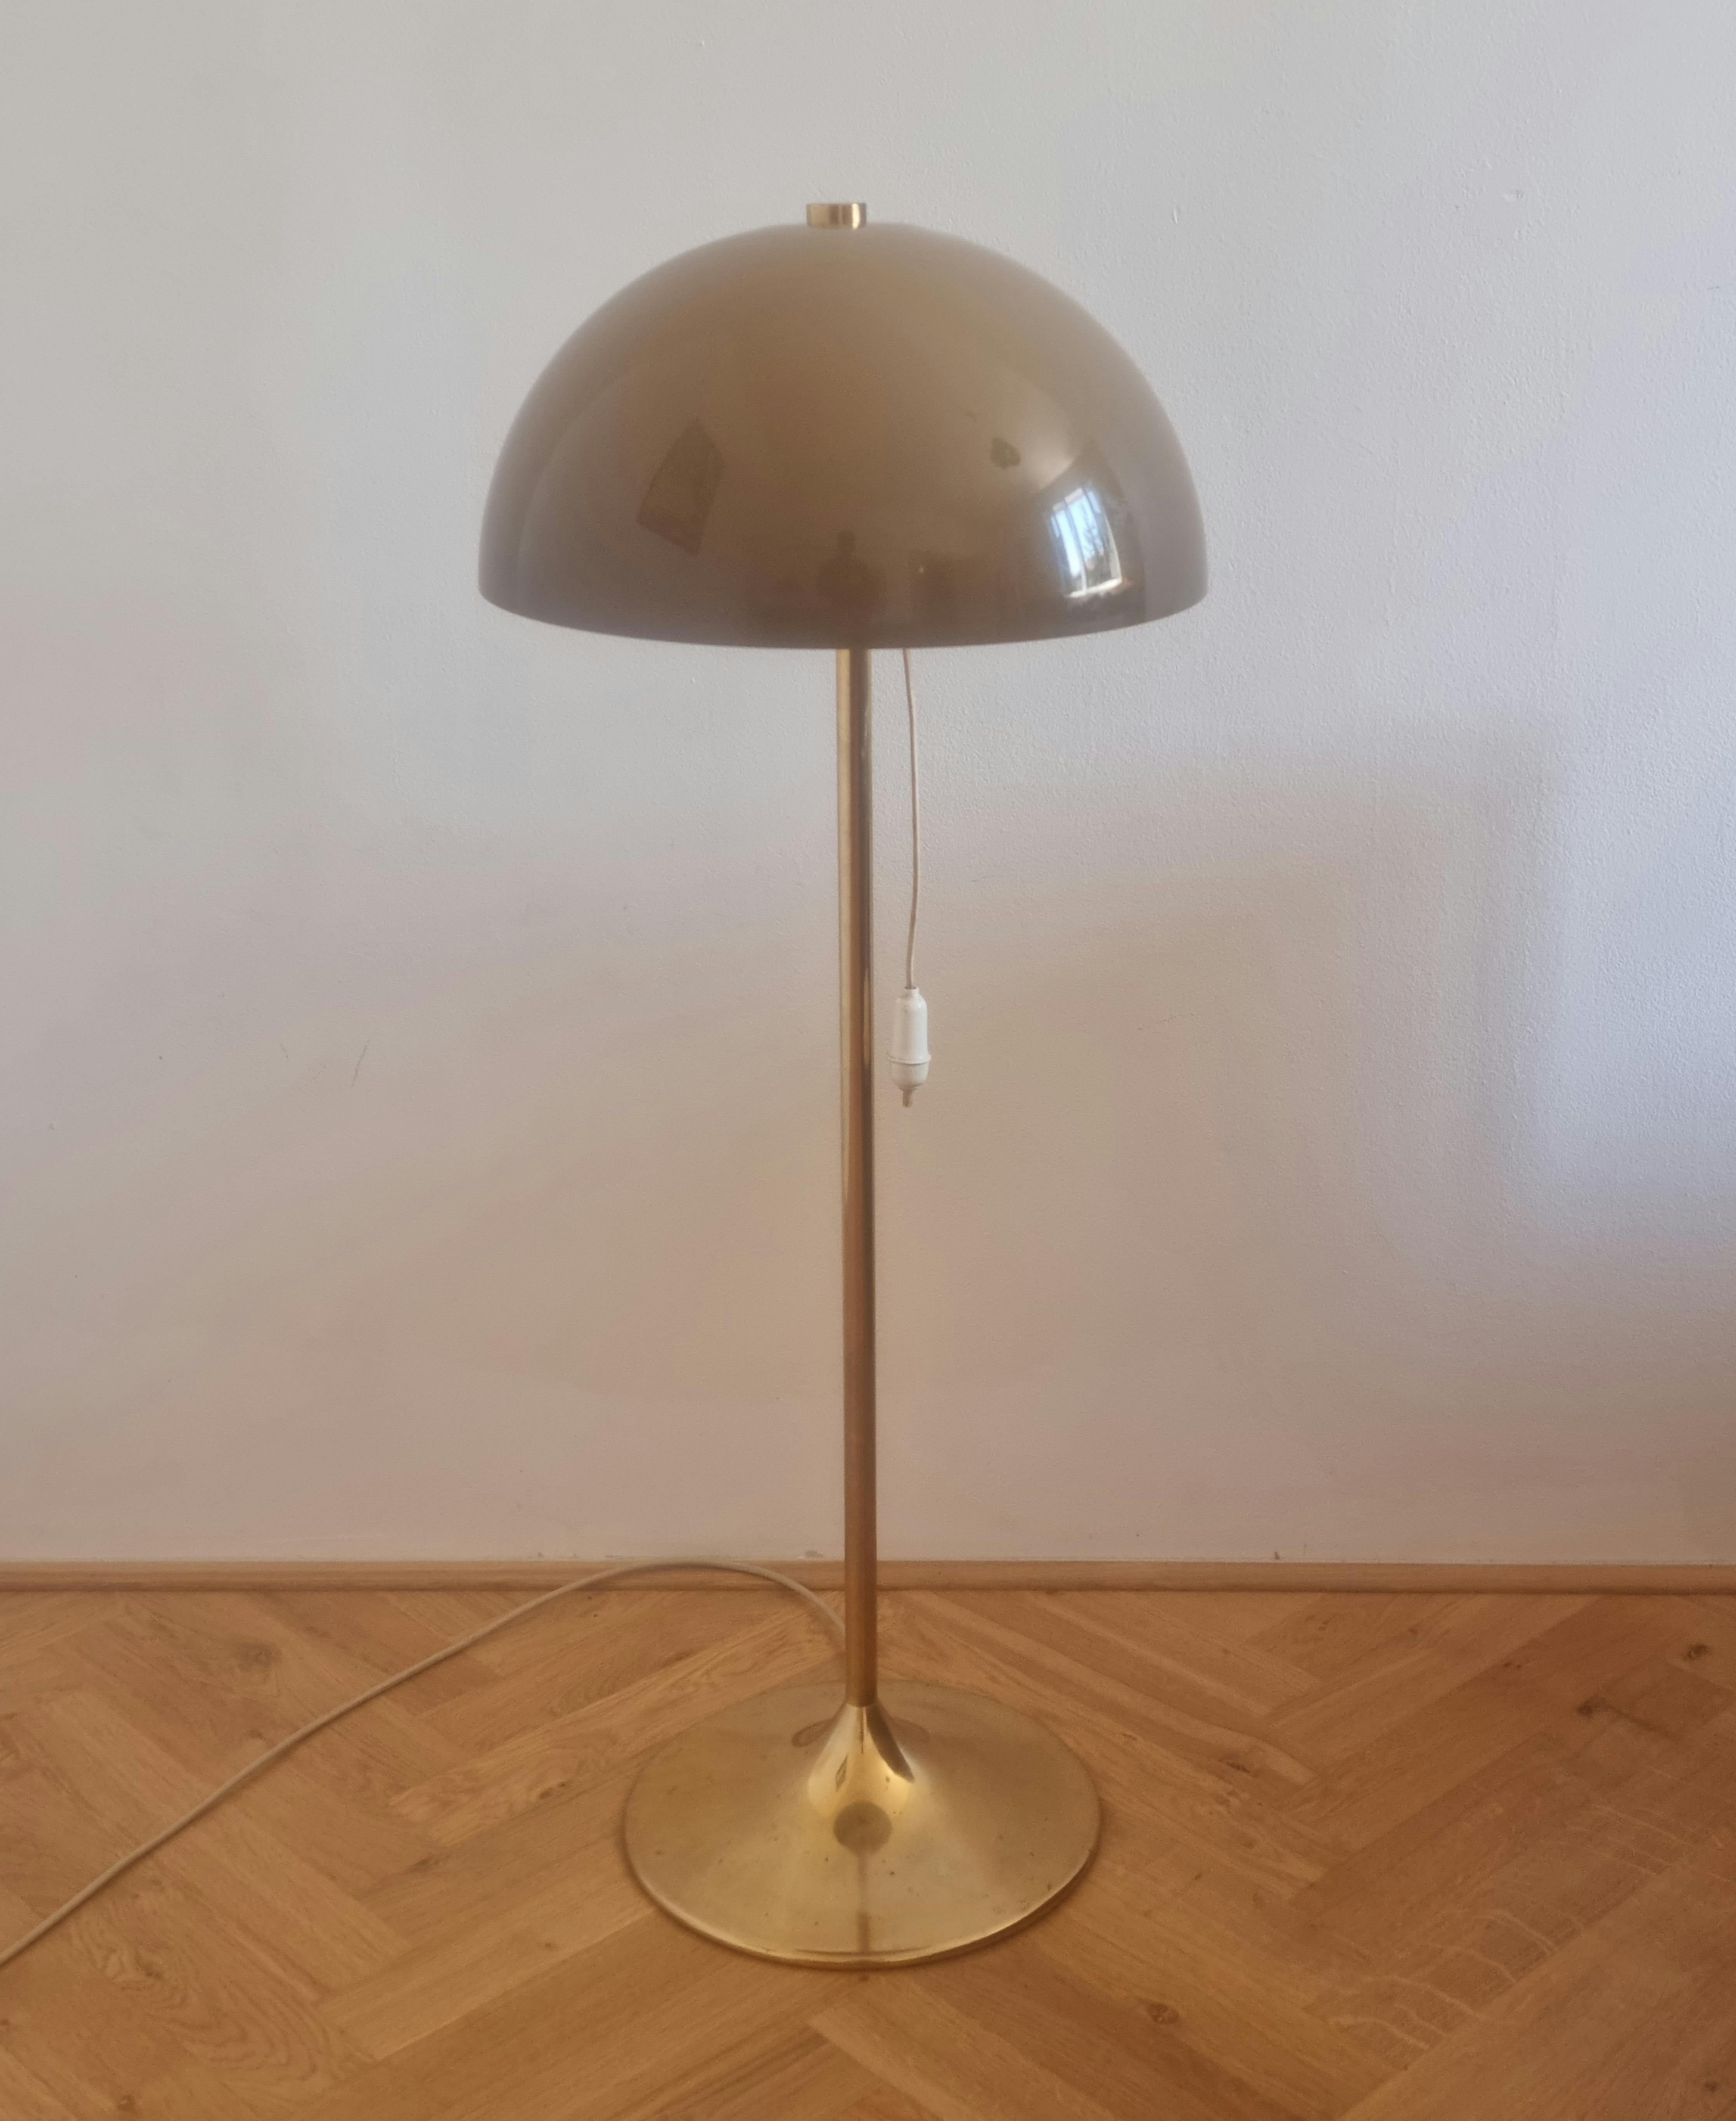 - Very nice style of lighting.
- Extremely rare type.
- In style of Panthella lamp.